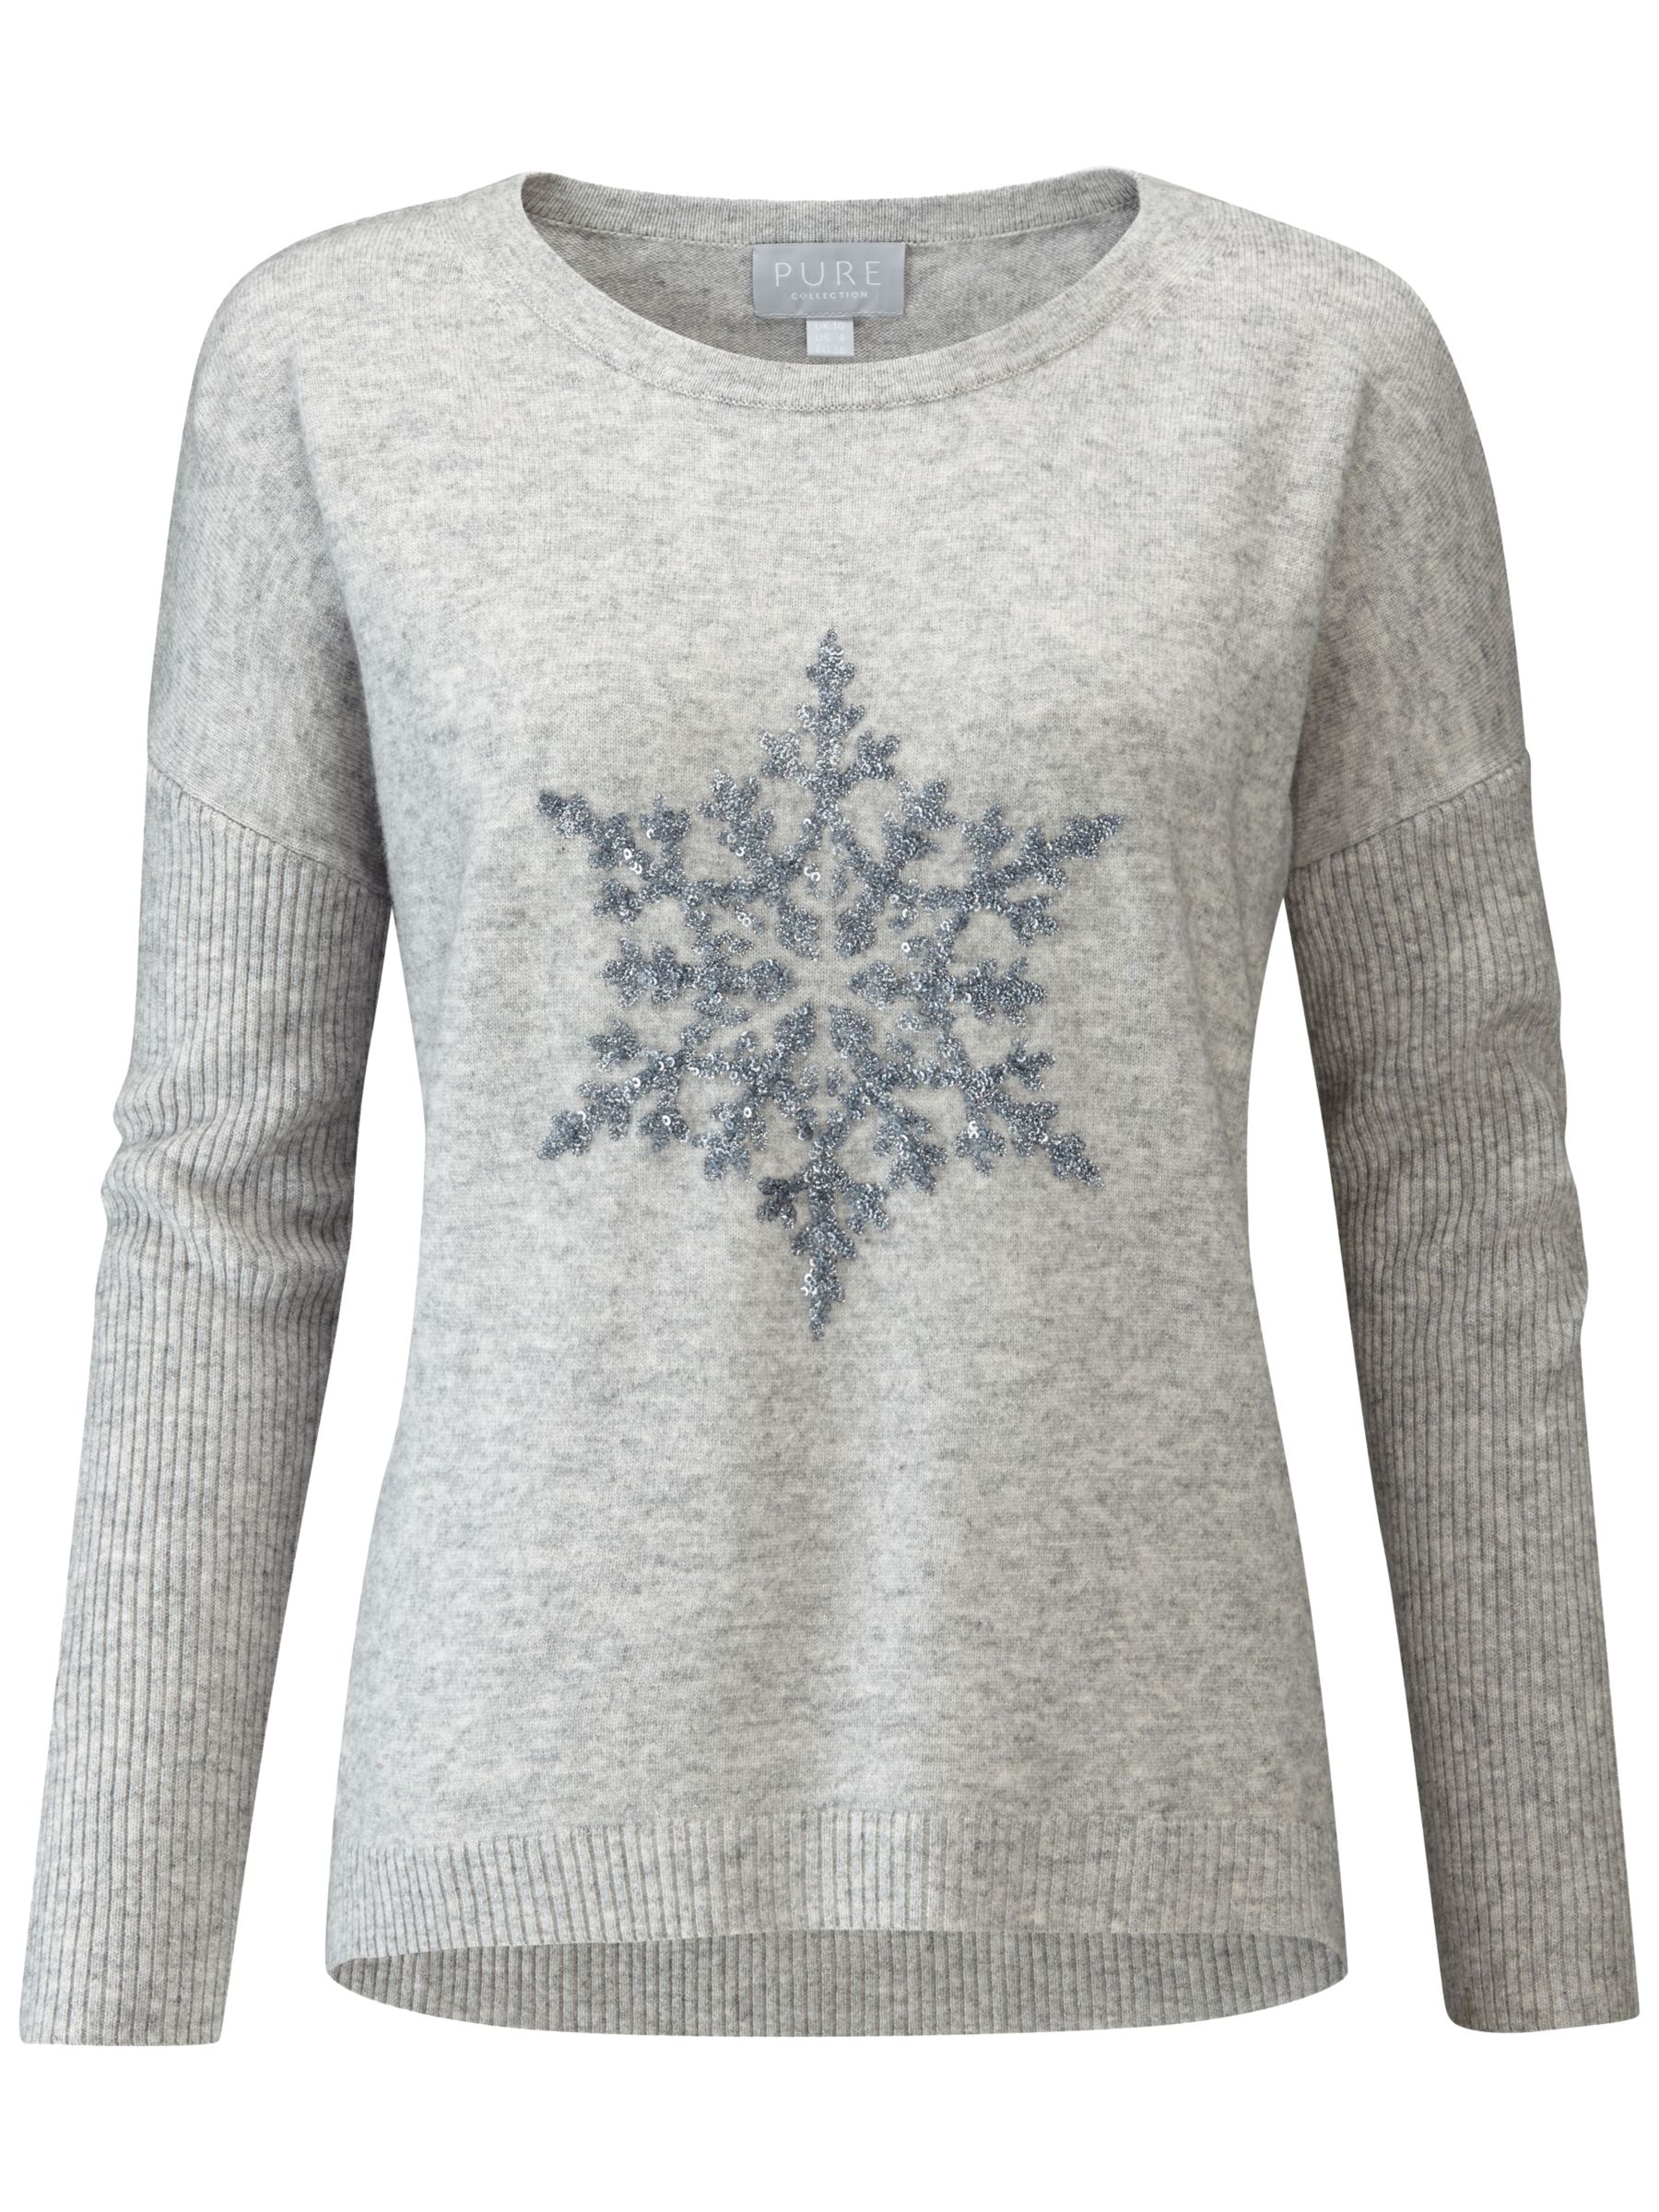 Pure Collection Sparkle Snowflake Dipped Hem Jumper, Grey, 20